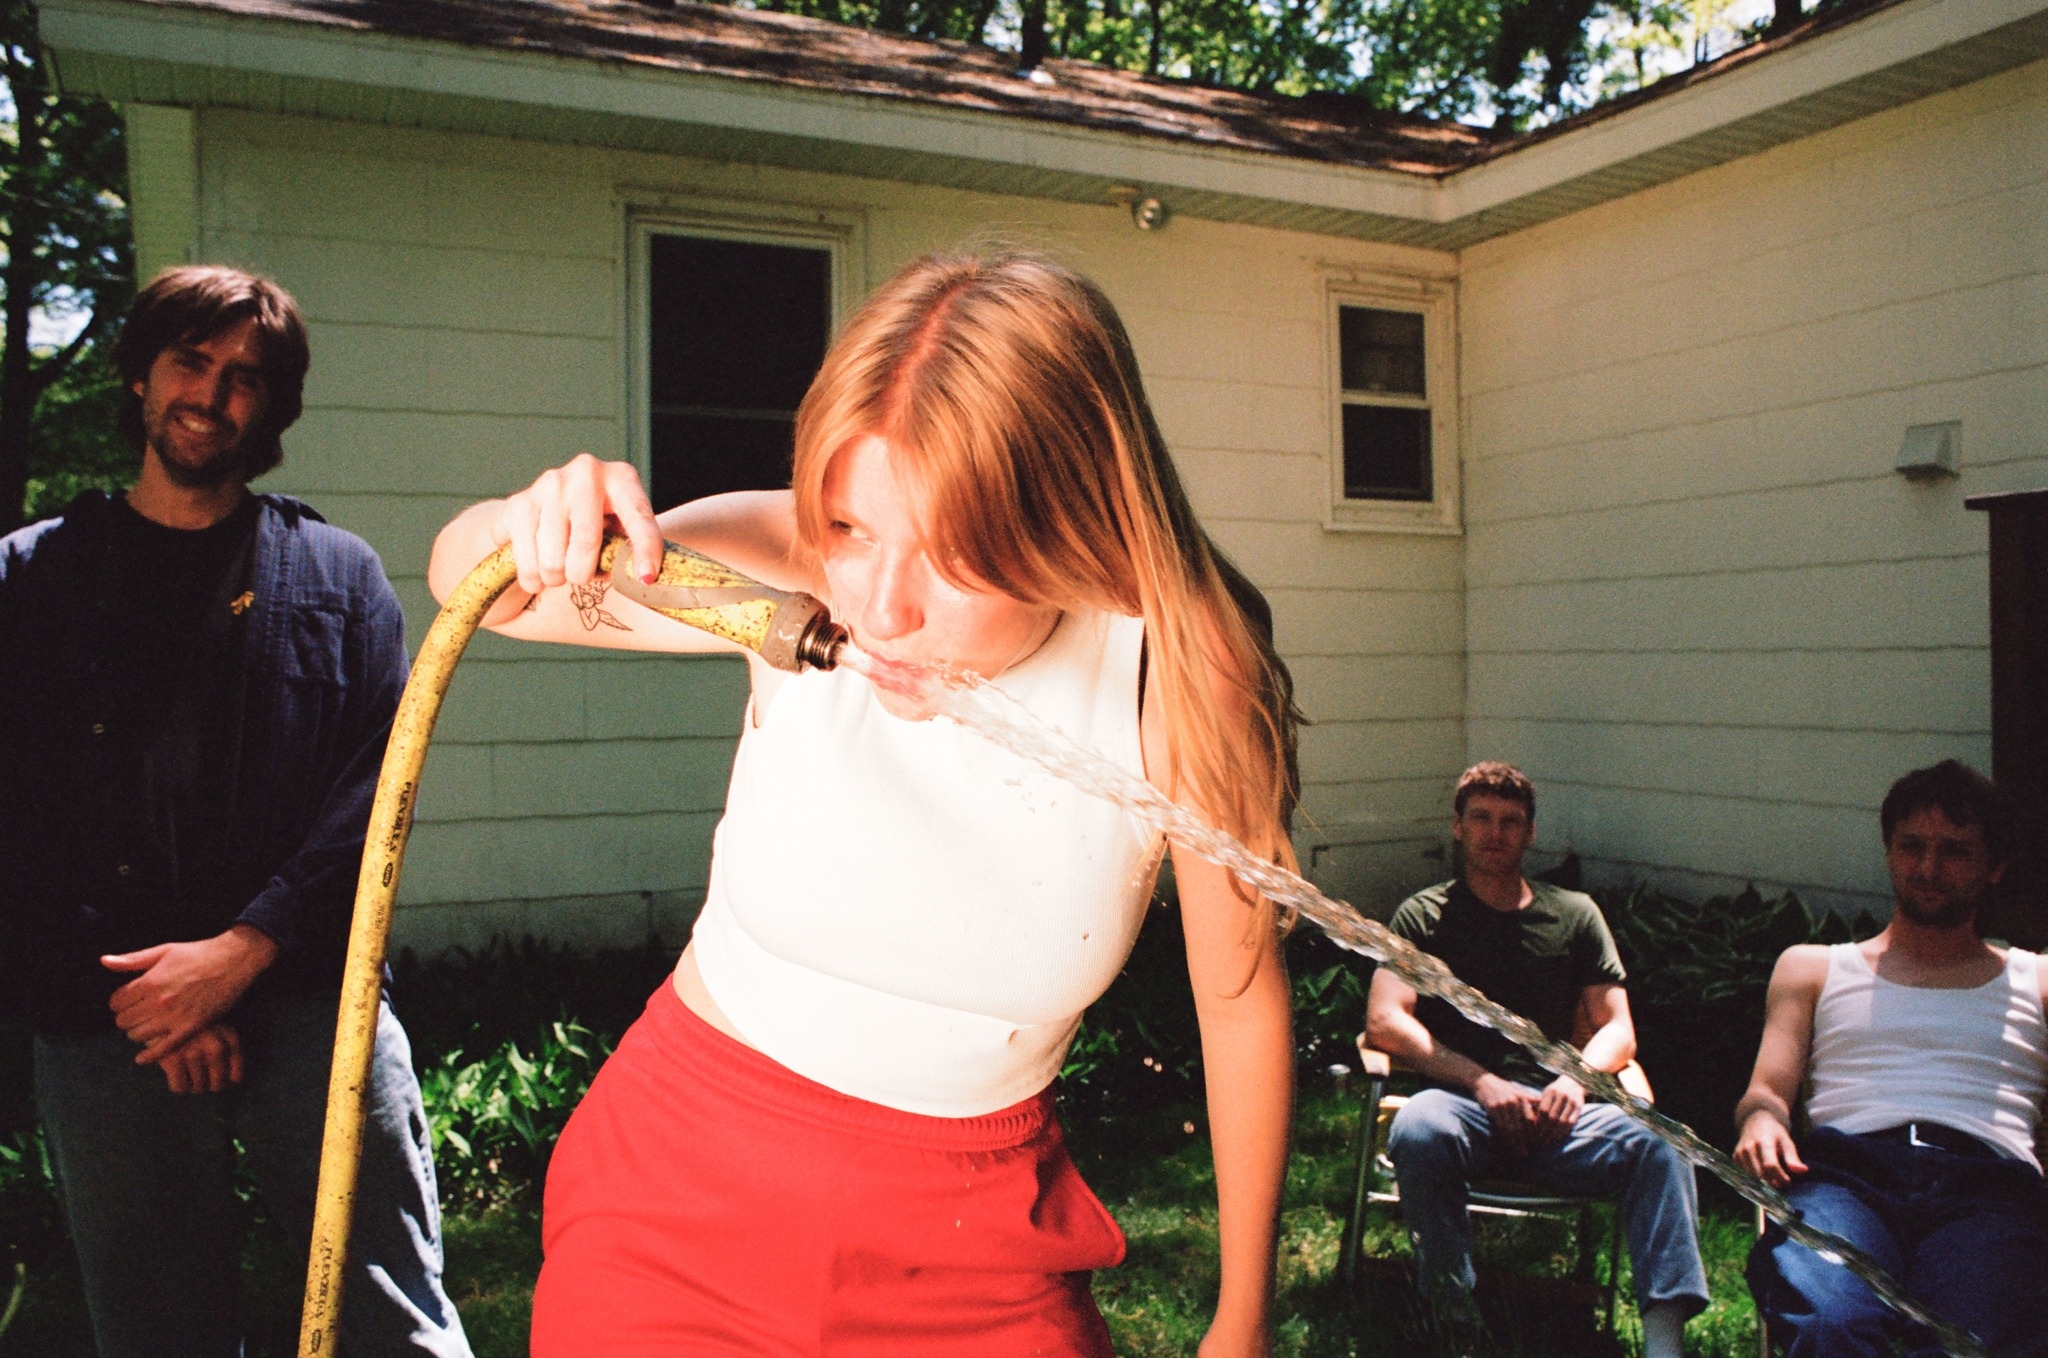 Slow Pulp band members gather around the lead singer as she drinks from a garden hose in the yard behind a house